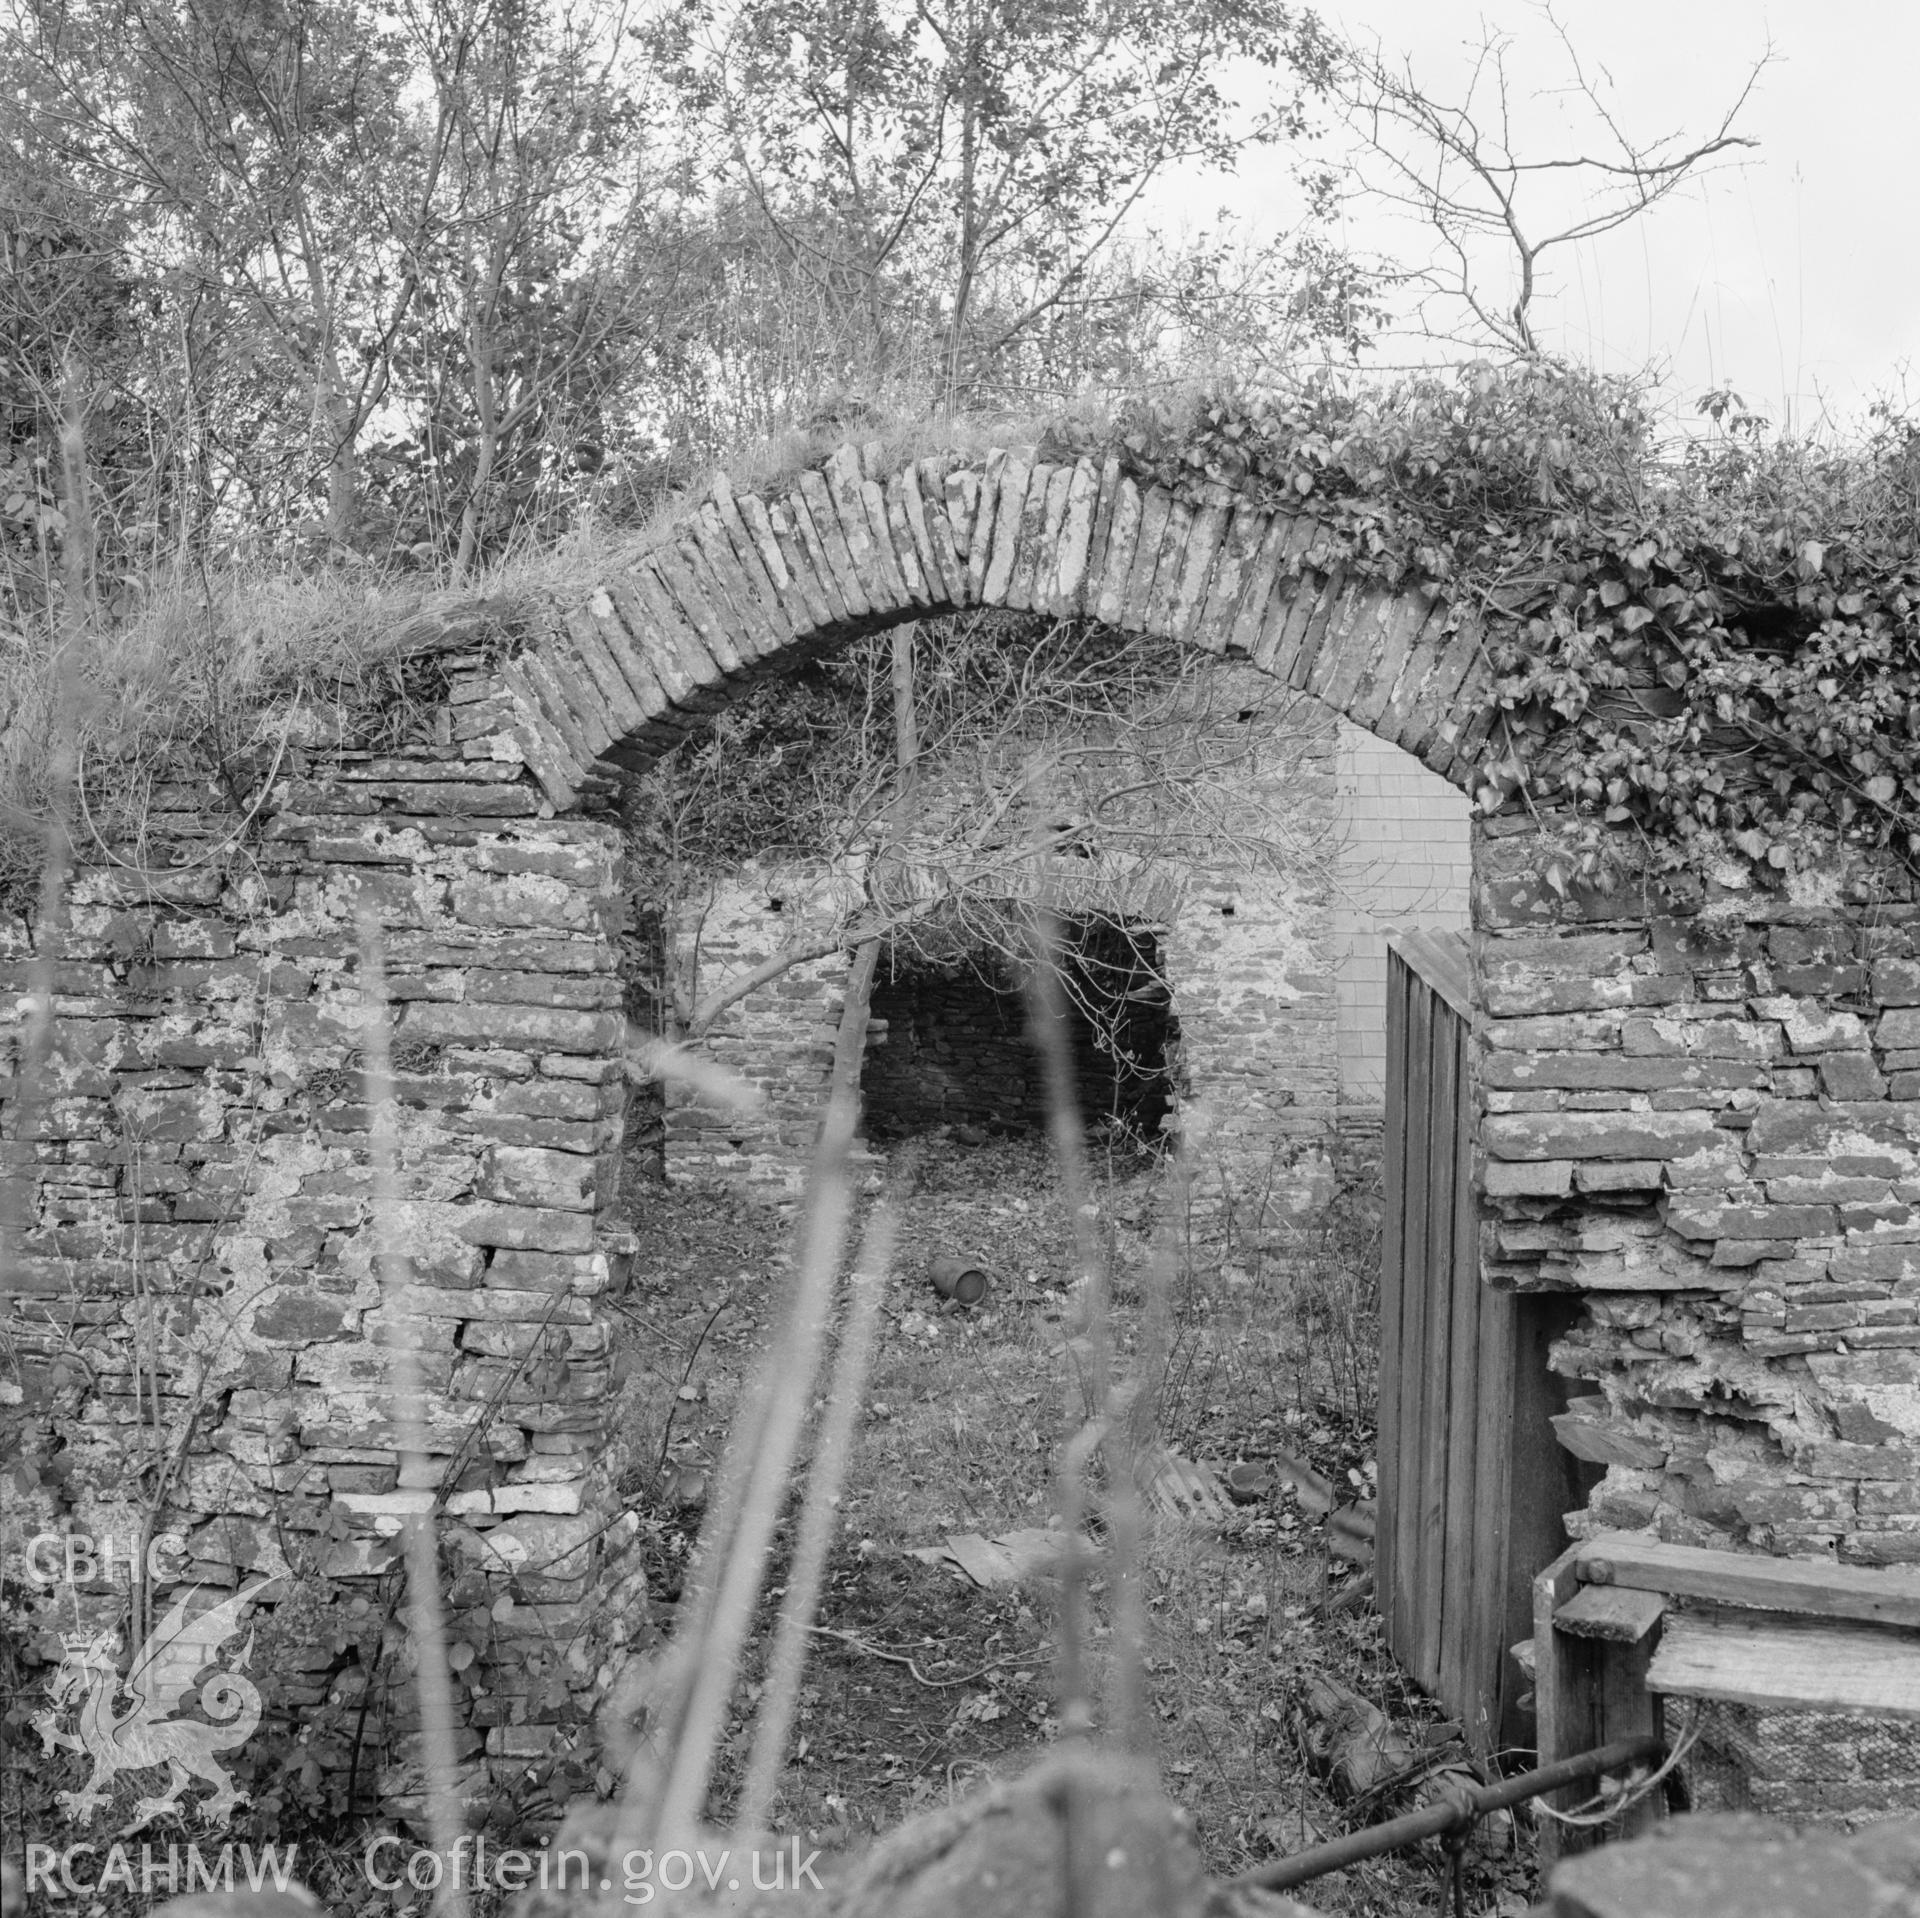 Digital copy of a black and white negative showing archway at Plas y Betws, taken by Harry Brooksby, 26th November 1965